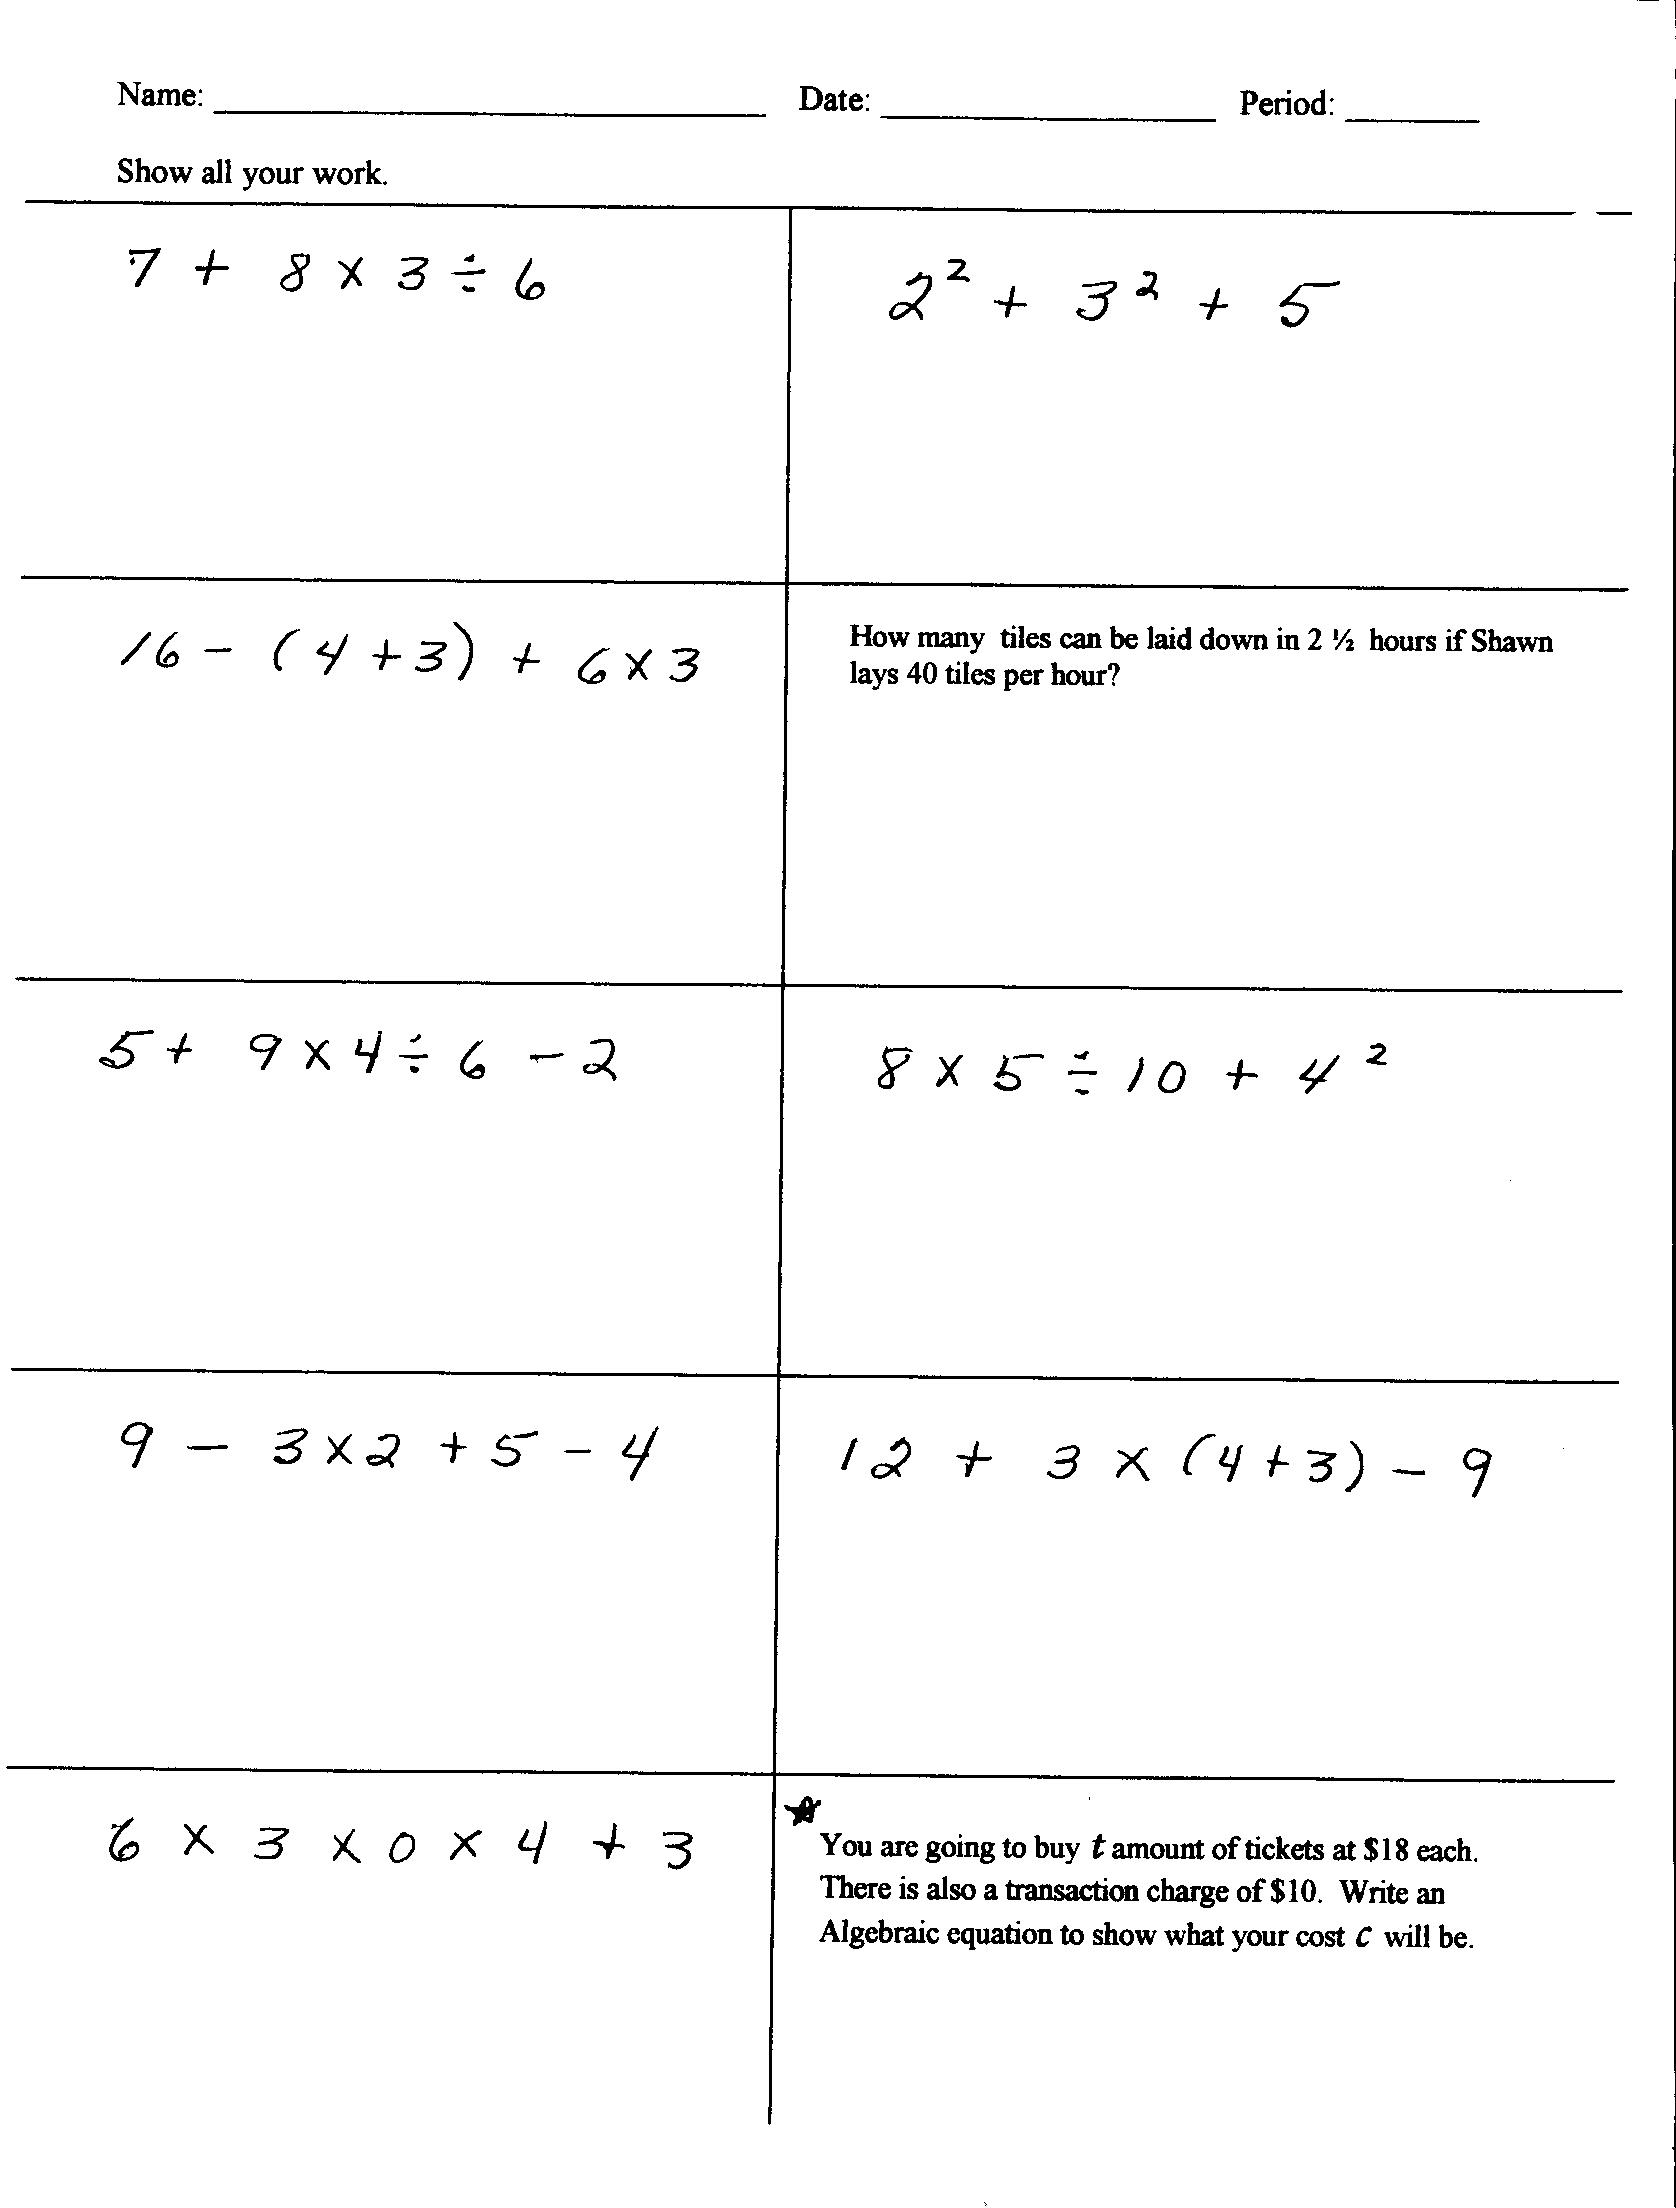 13 Best Images of Solving Equations Worksheets 6th Grade - 3rd Grade ...